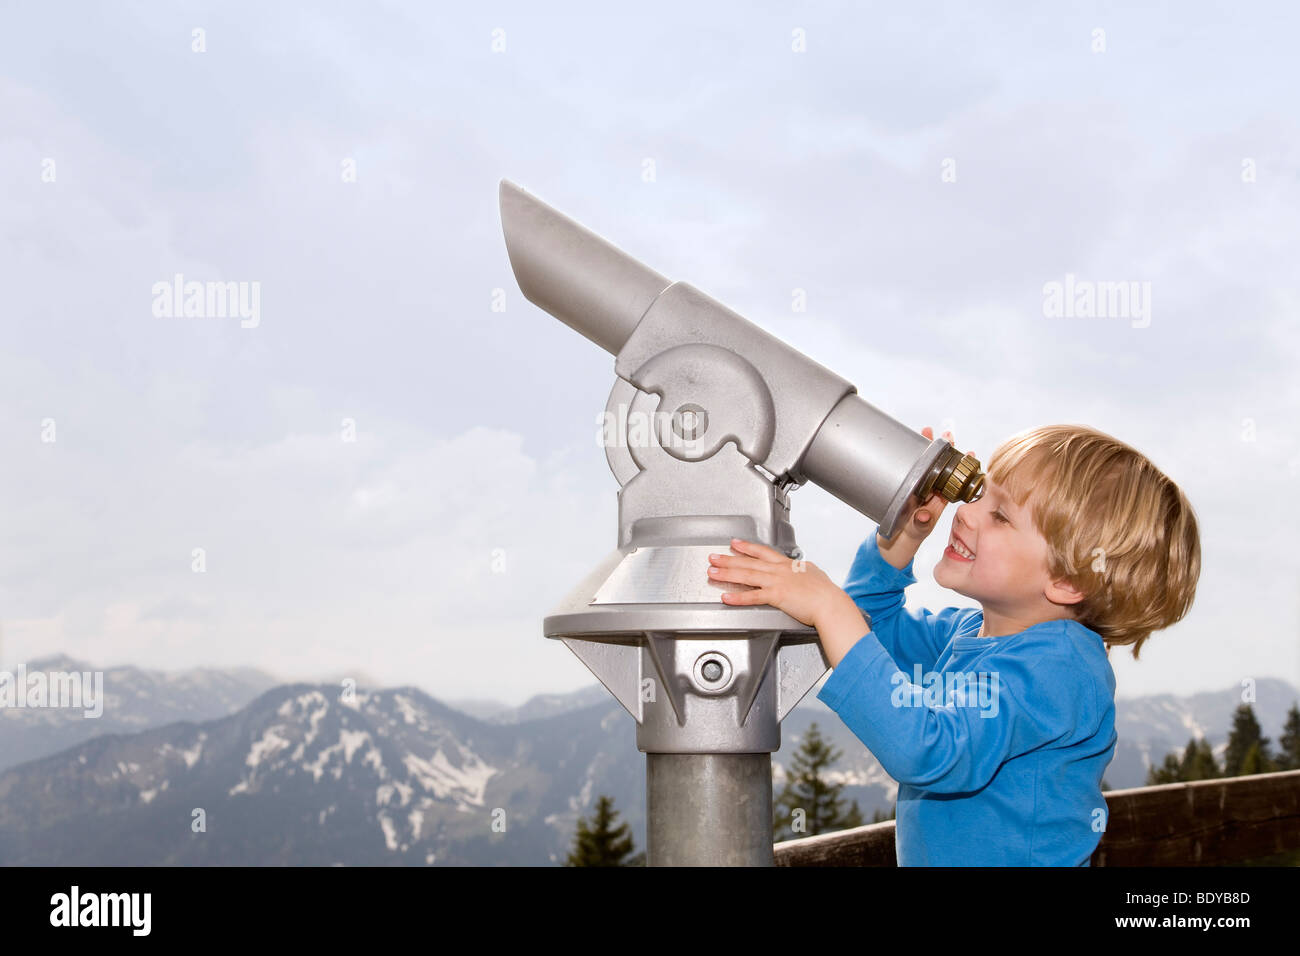 Boy looking through telescope Banque D'Images